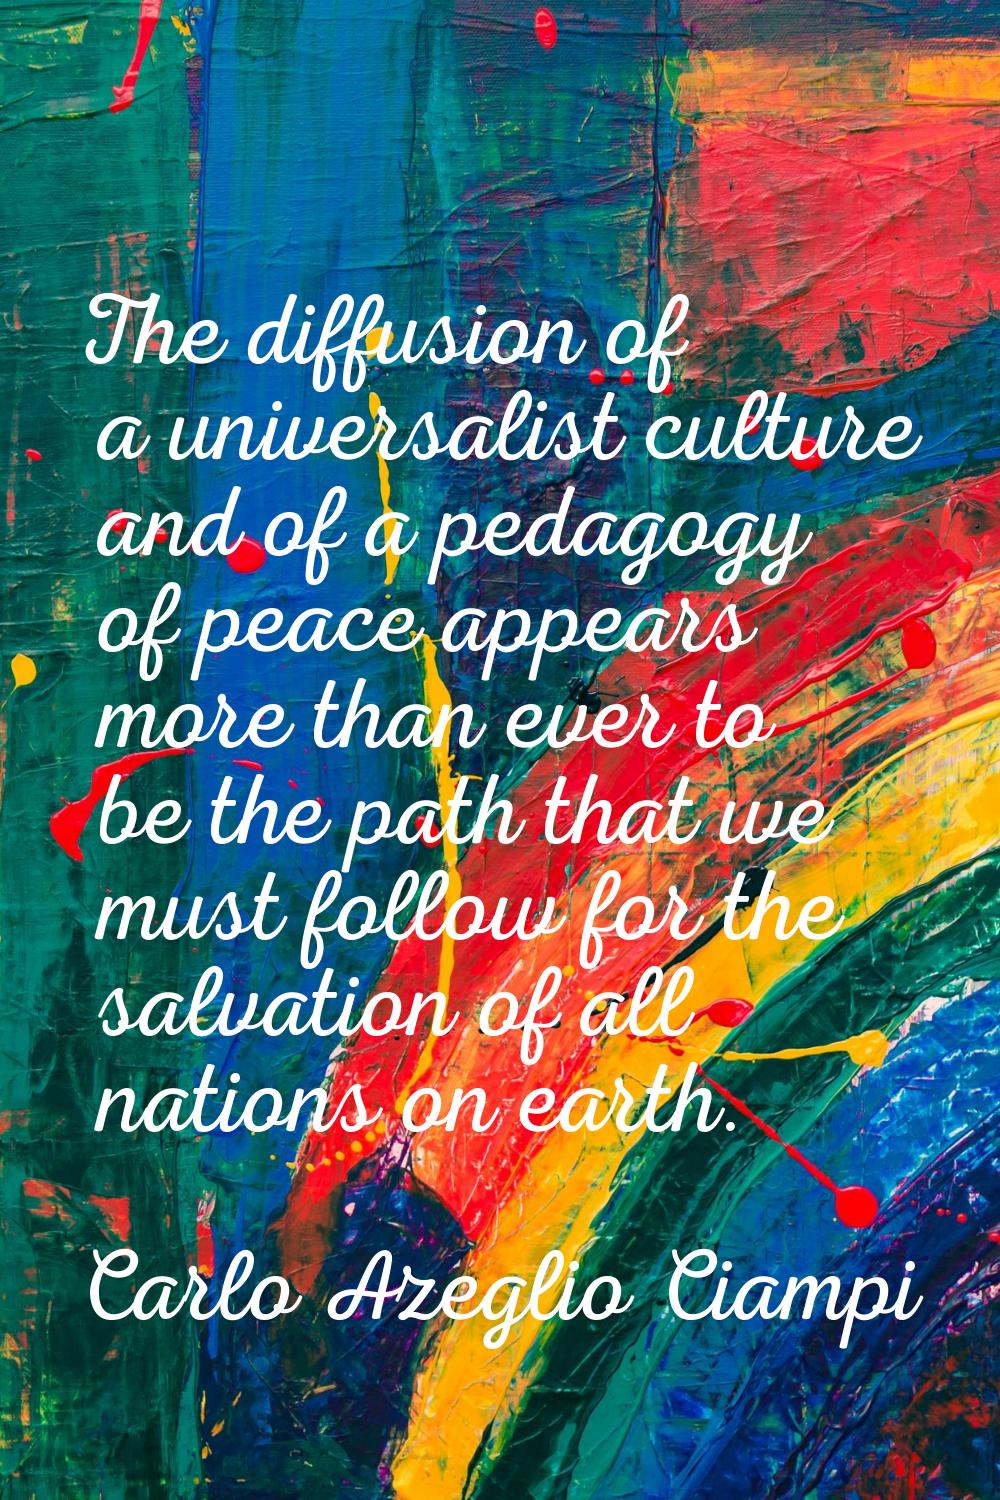 The diffusion of a universalist culture and of a pedagogy of peace appears more than ever to be the